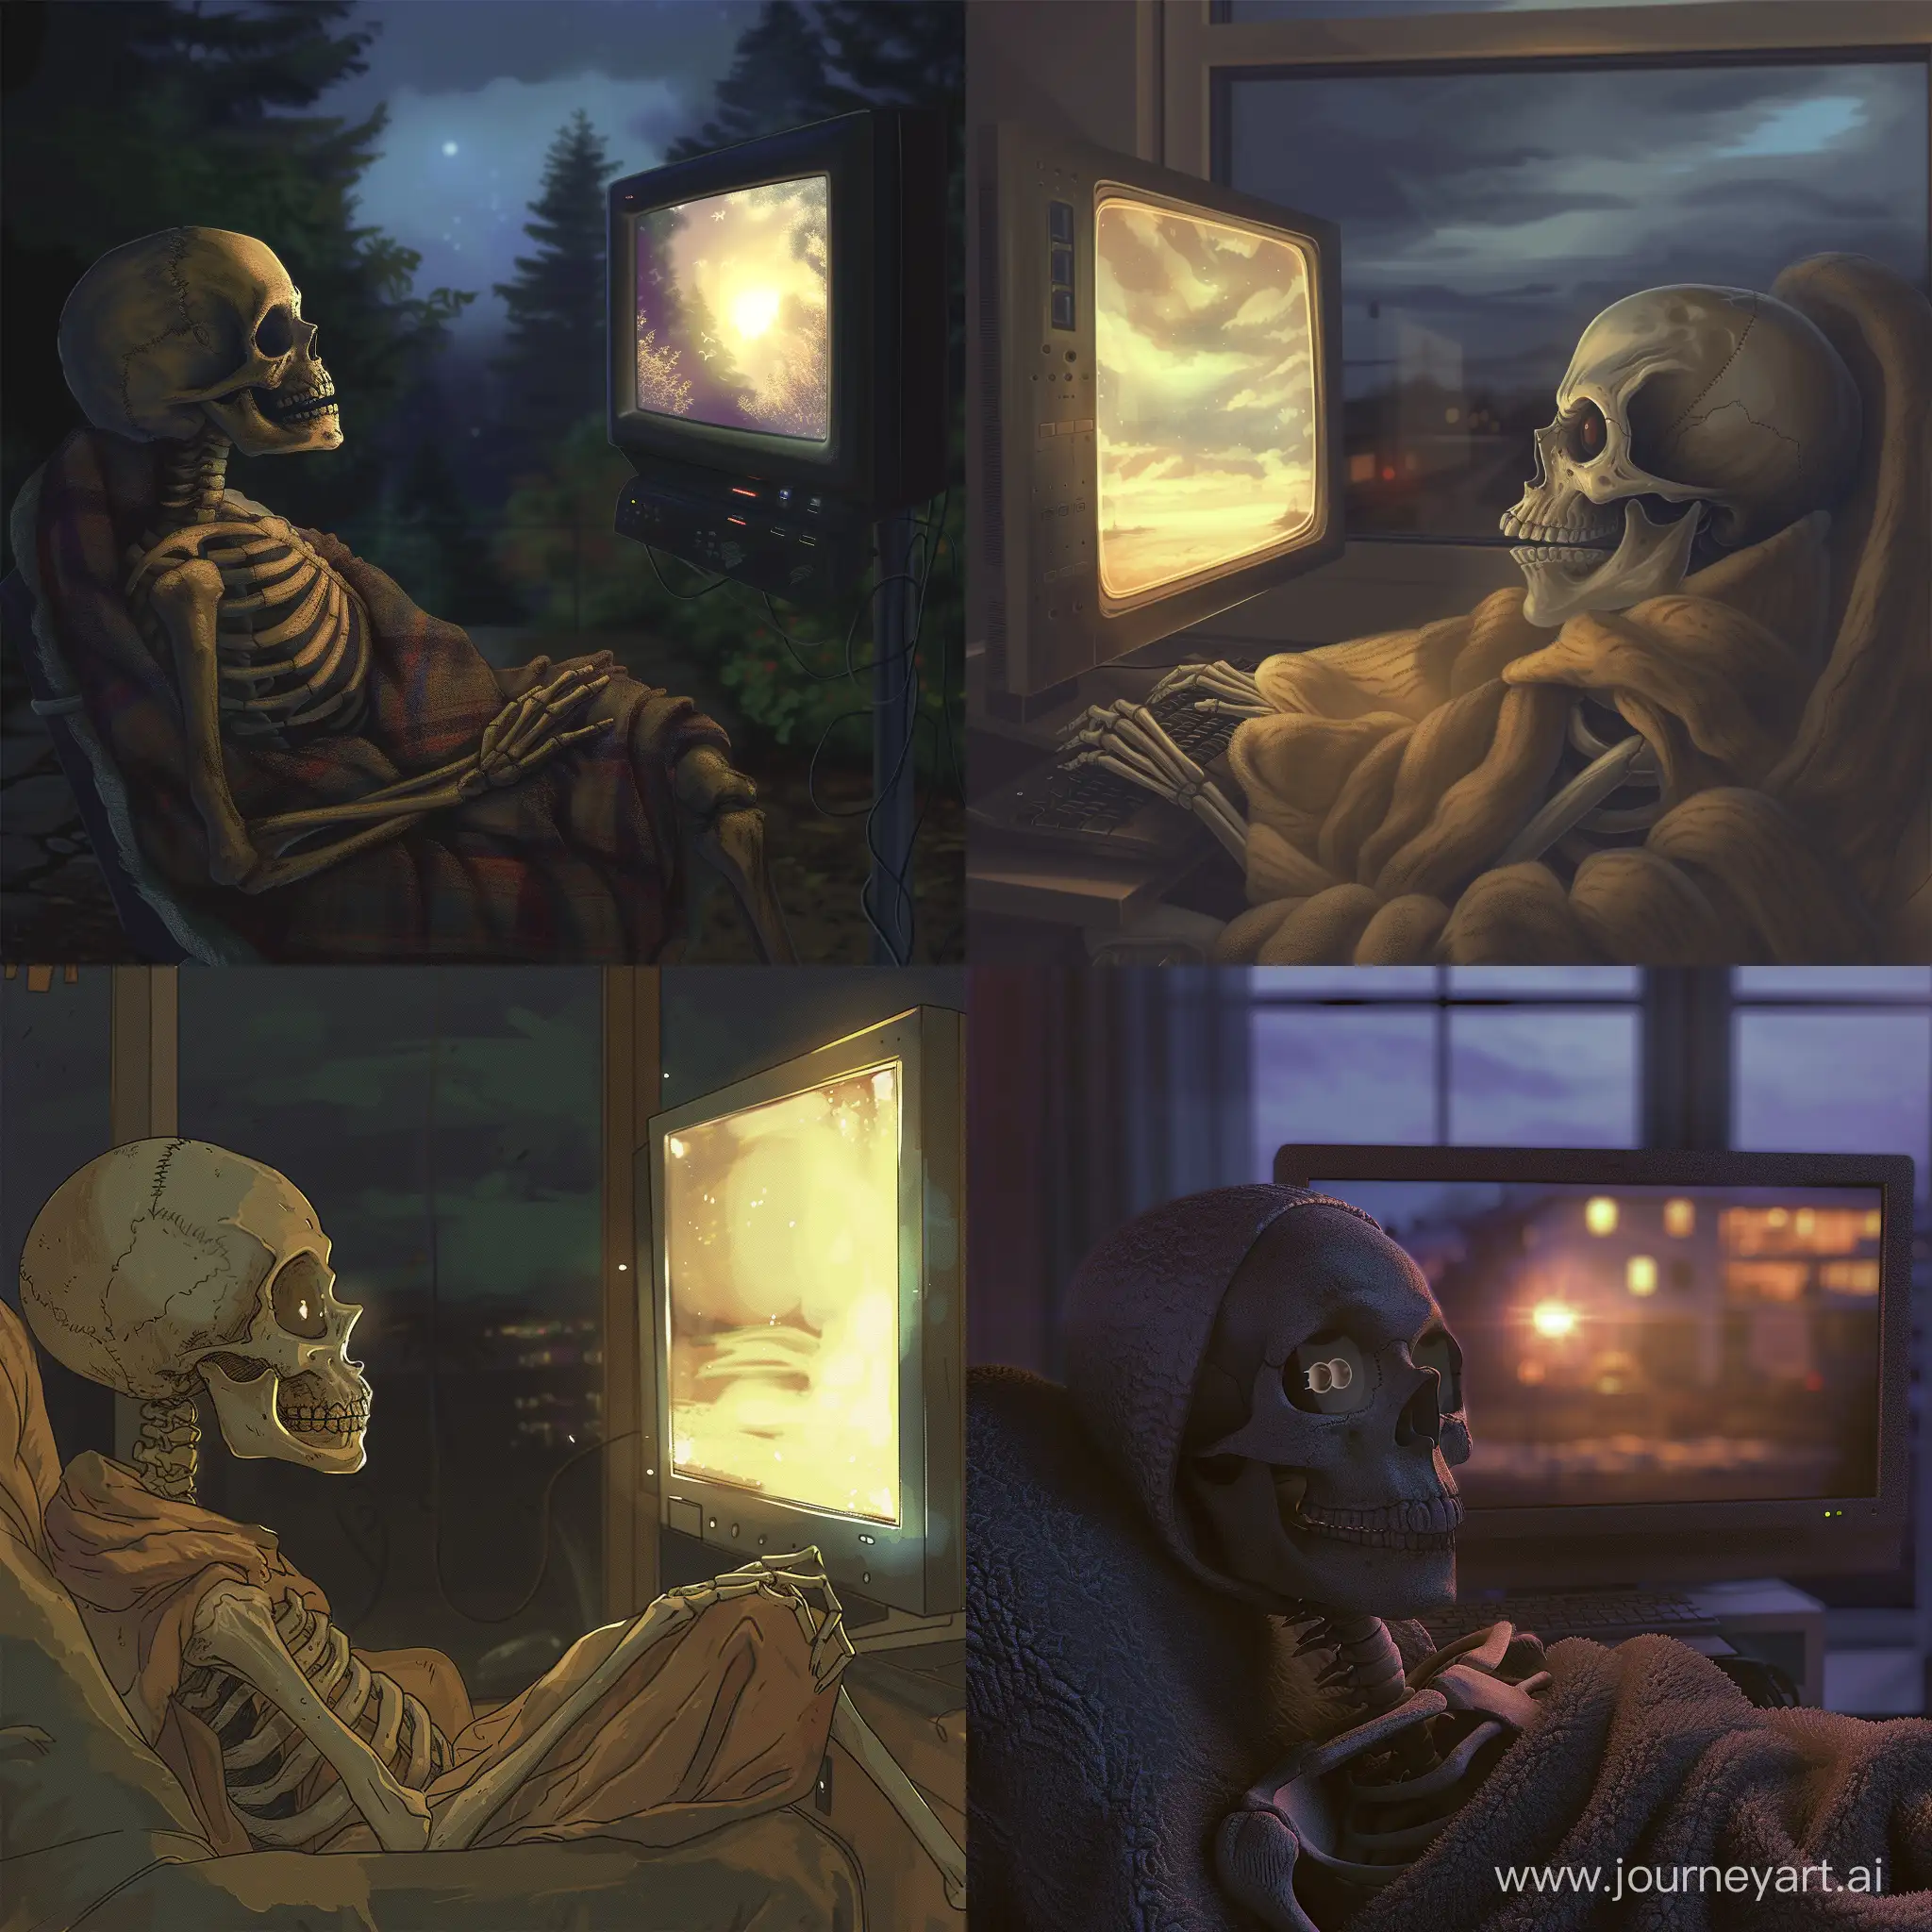 Lonely-Skeleton-Contemplating-the-Glow-of-the-Screen-in-the-Dark